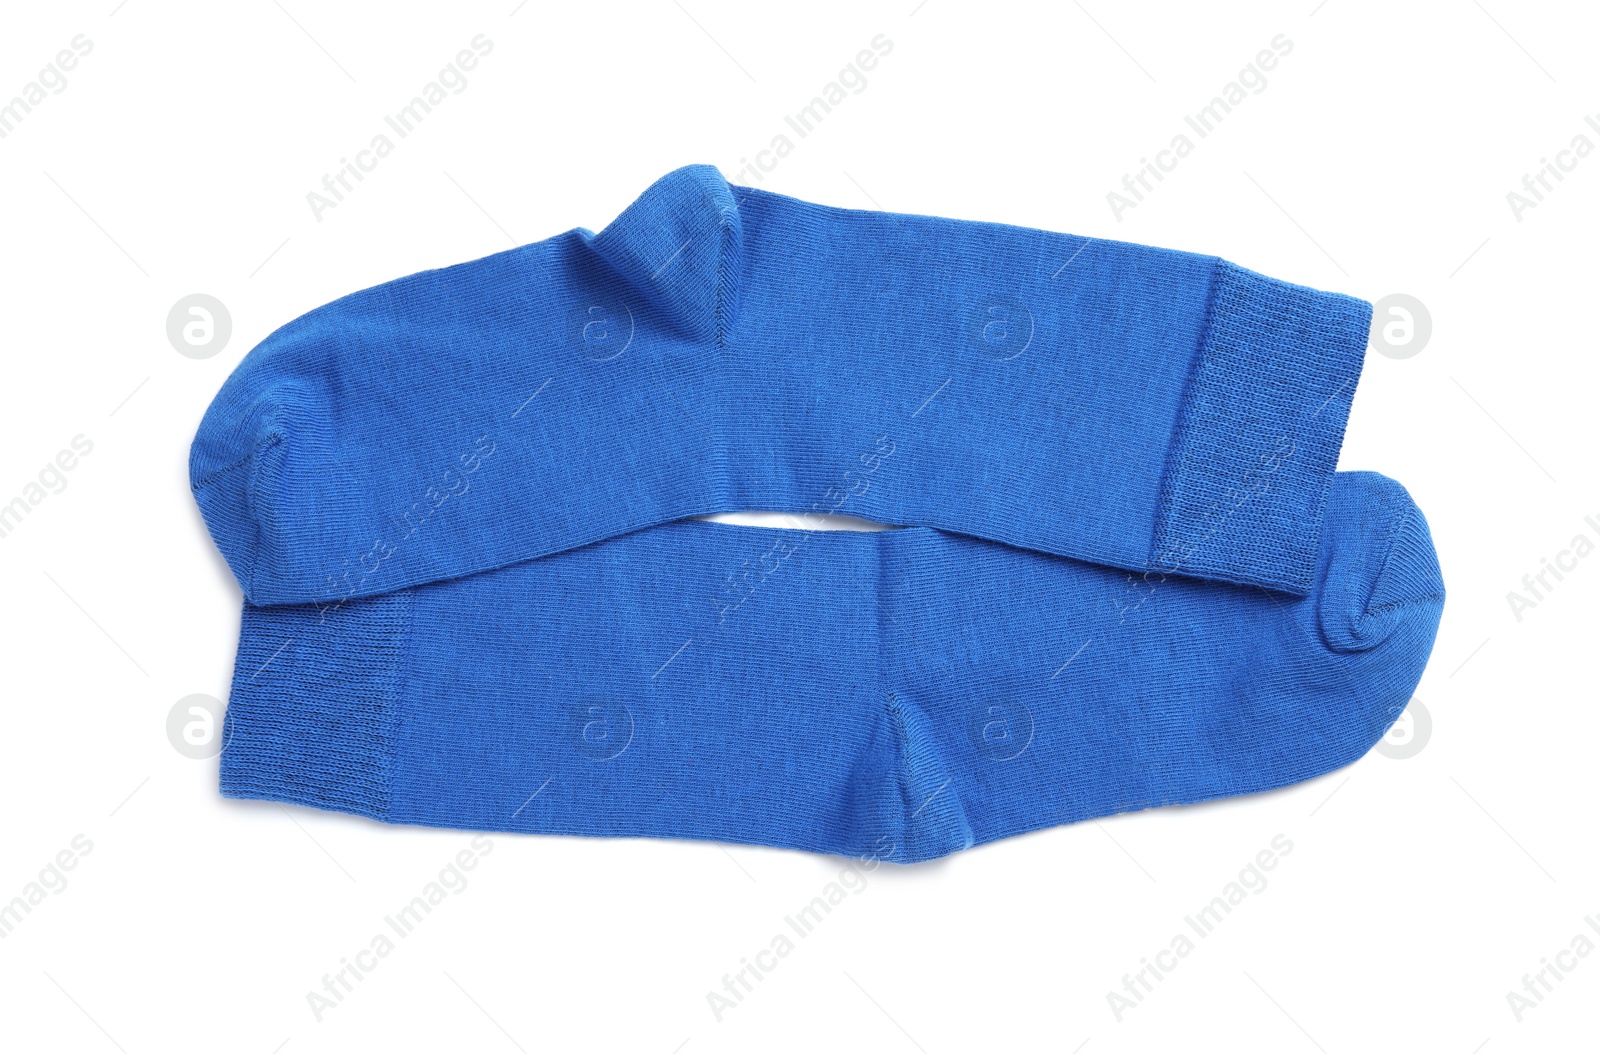 Photo of Pair of blue socks on white background, top view